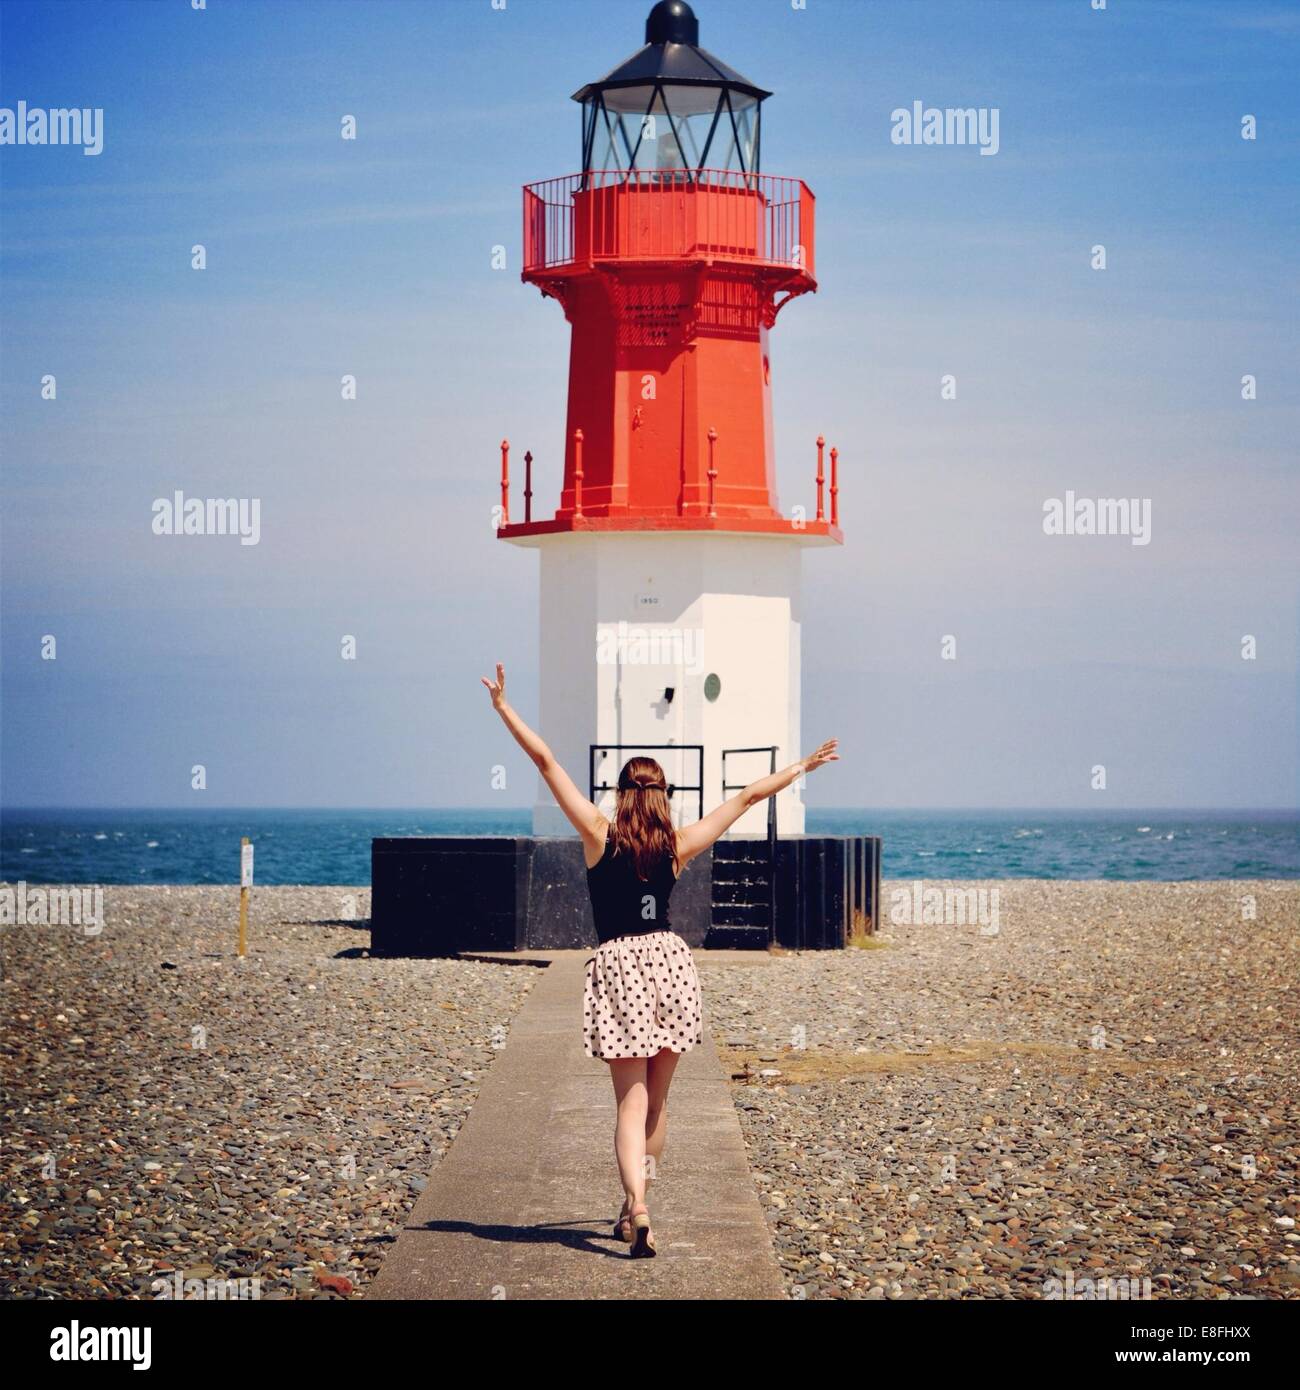 Woman standing in front of lighthouse Banque D'Images